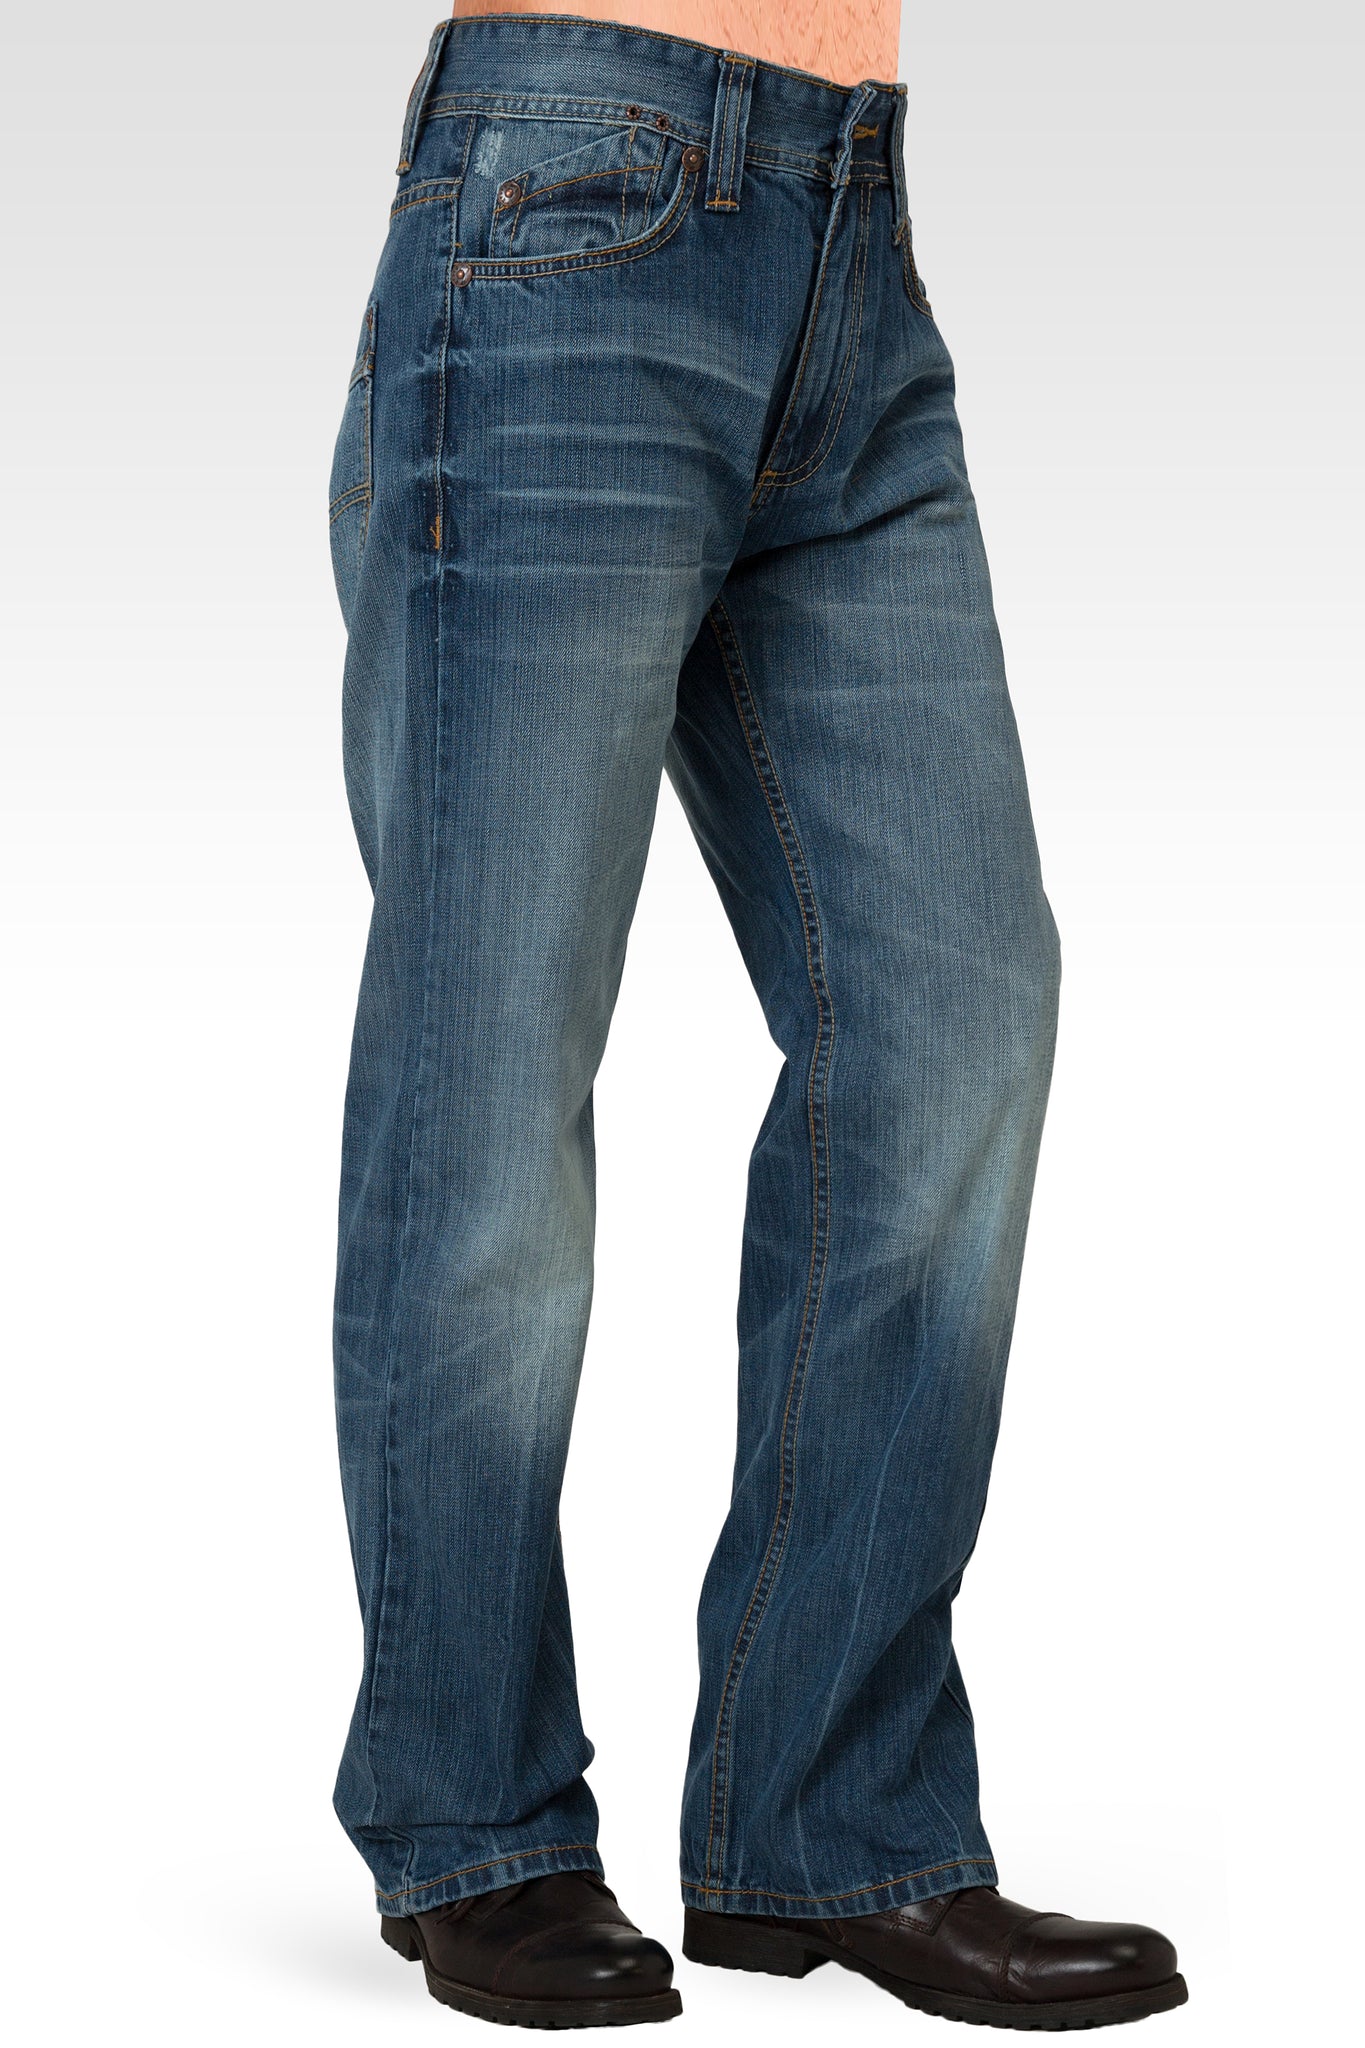 Midrise Relaxed Bootcut Medium Blue Premium Denim 5 pocket Jeans with Vintage Wash Whiskering